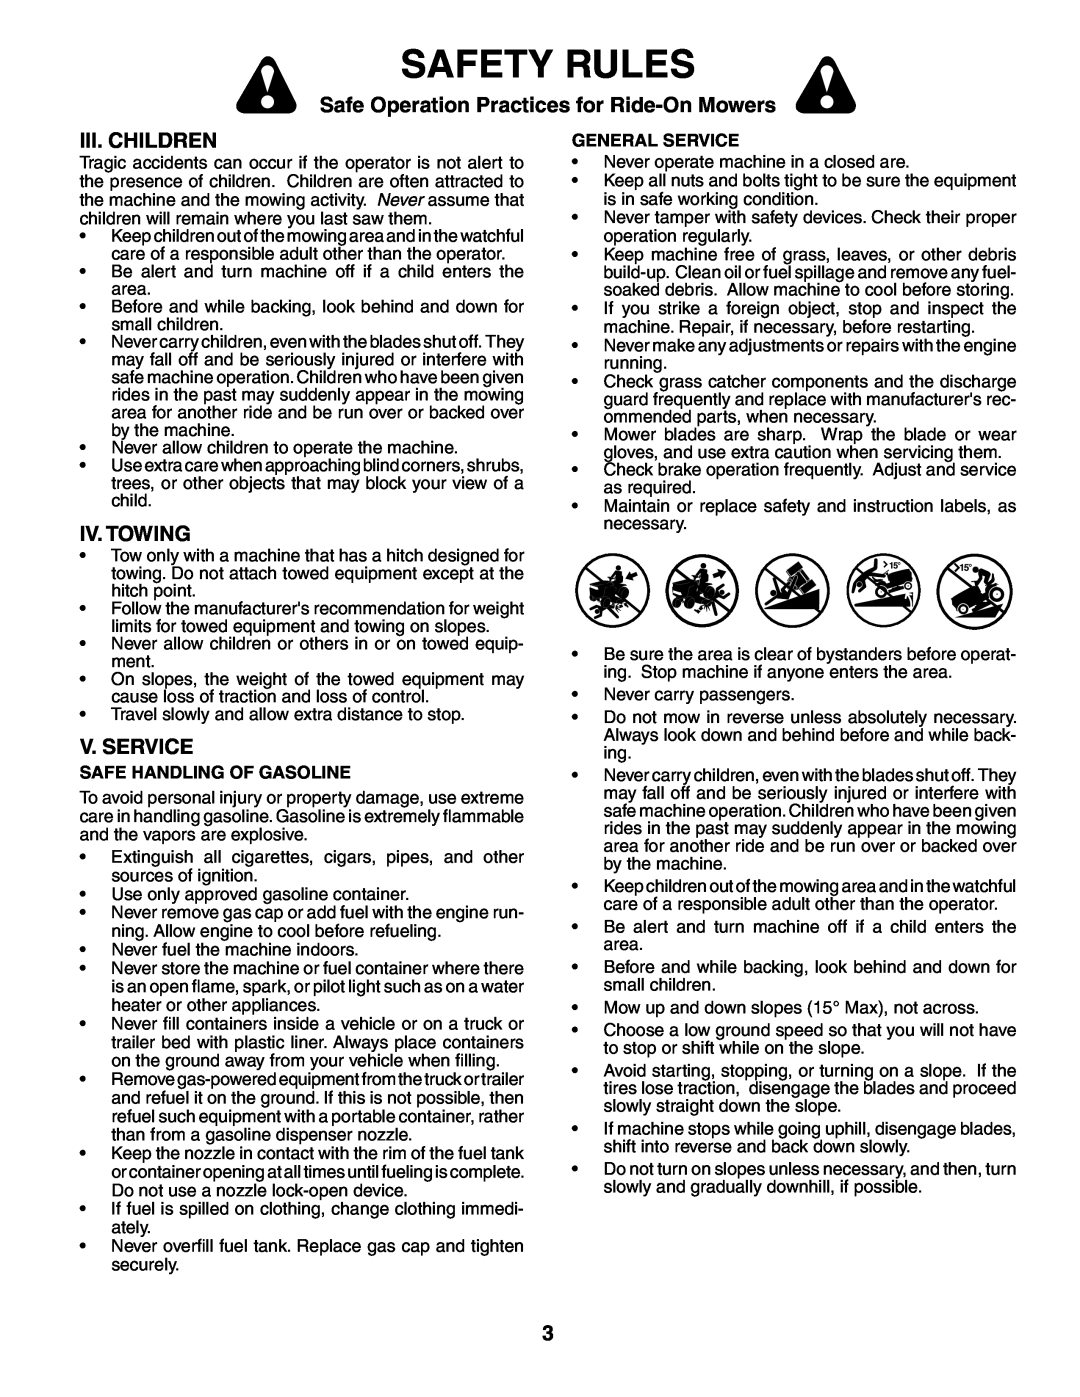 McCulloch MC175H42ST Iii. Children, Iv. Towing, V. Service, Safety Rules, Safe Operation Practices for Ride-On Mowers 